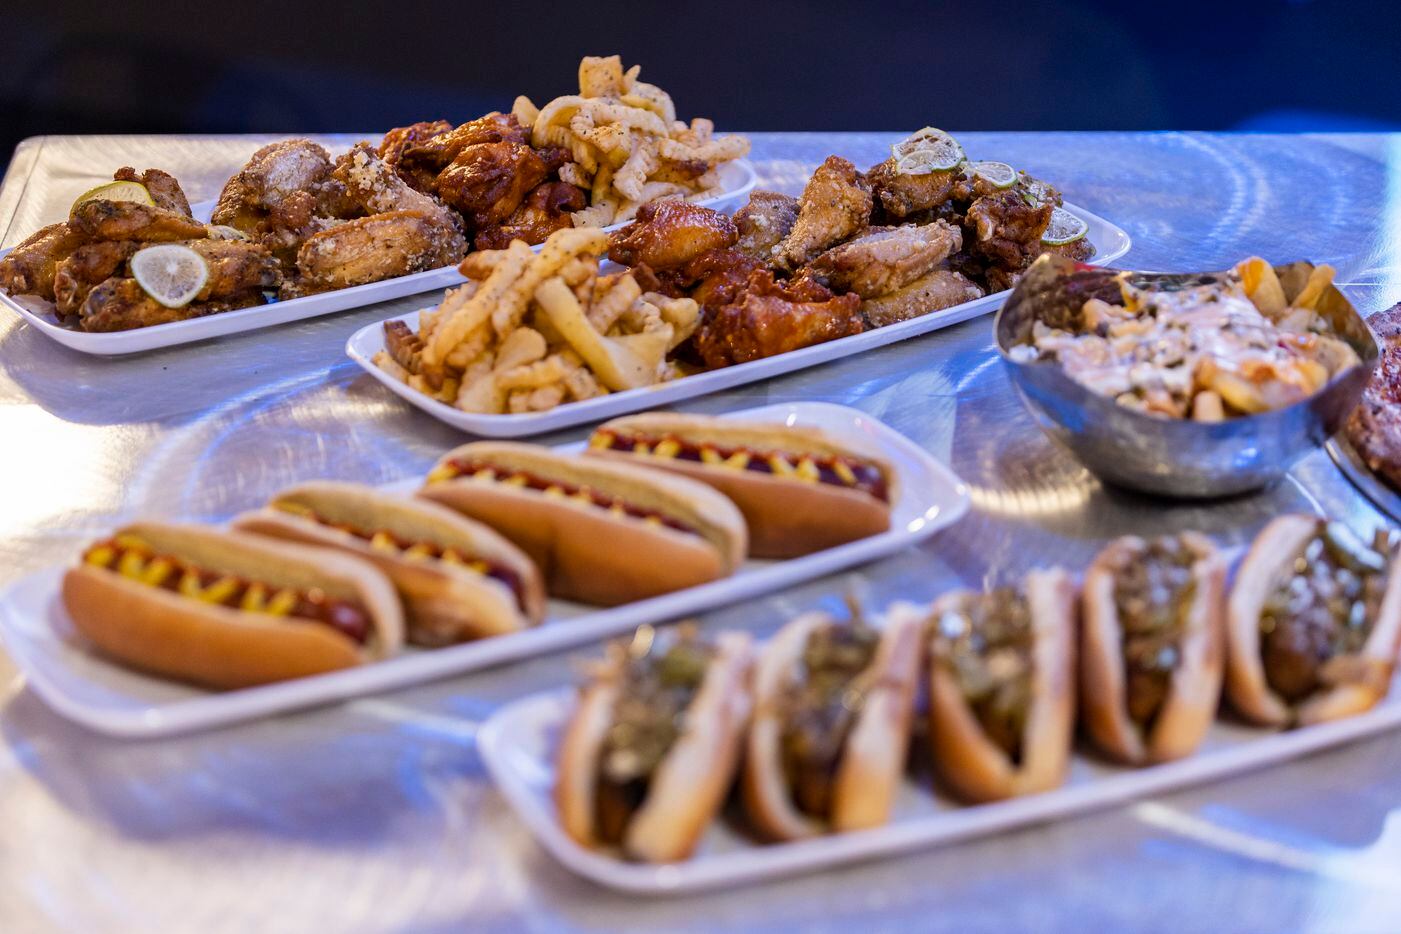 A sampling of food, including hot dogs and seasoned chicken wings, available for purchase at...